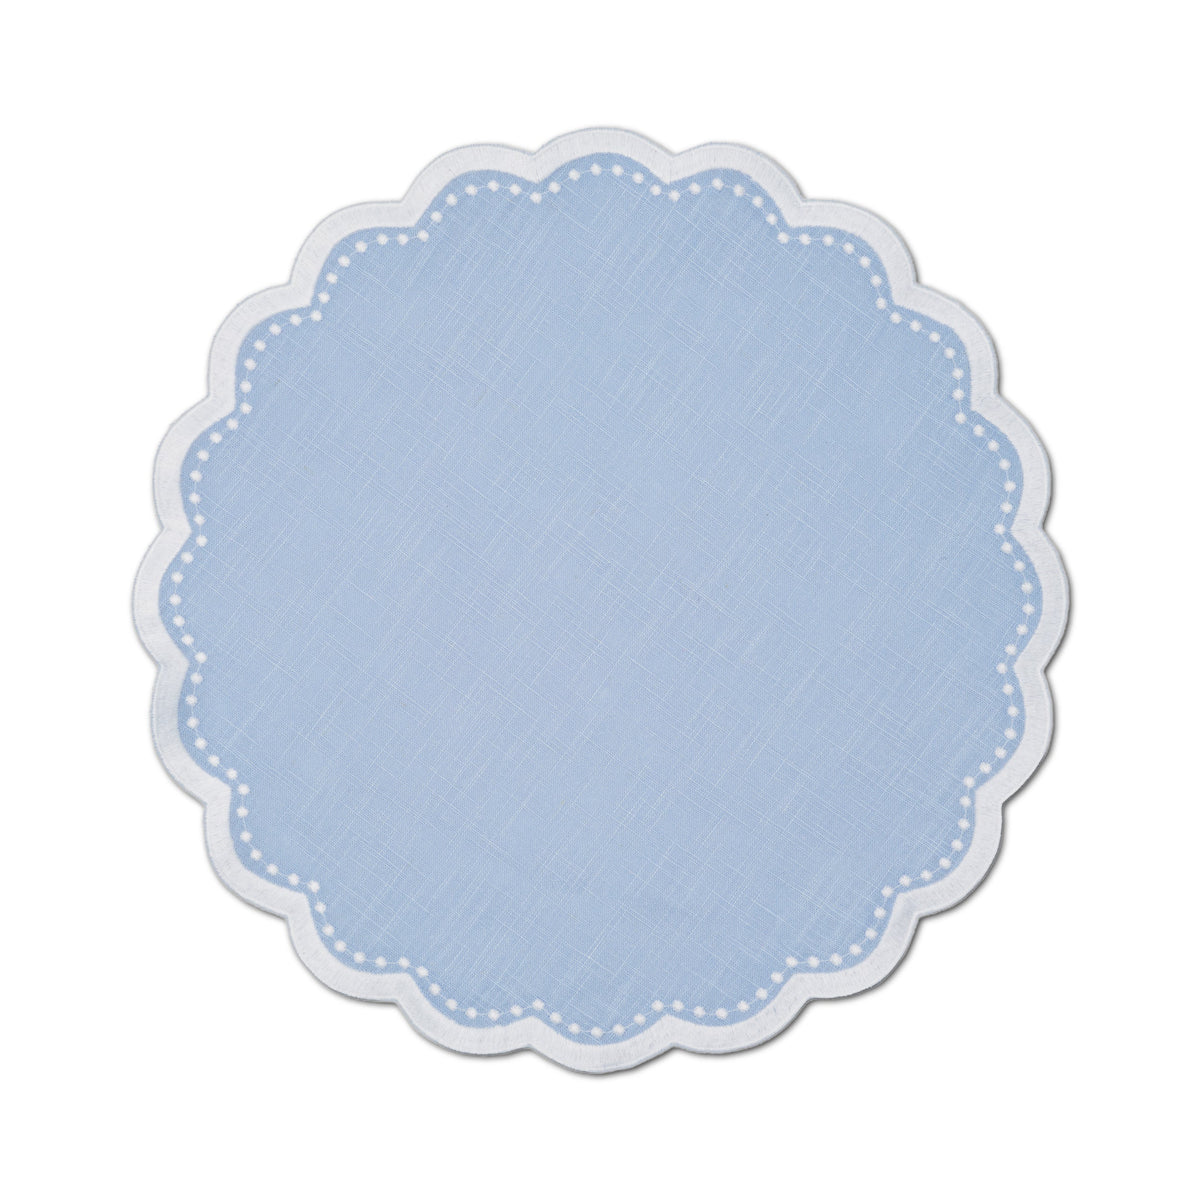 Bluebell Placemat in Light Blue, Set of 4